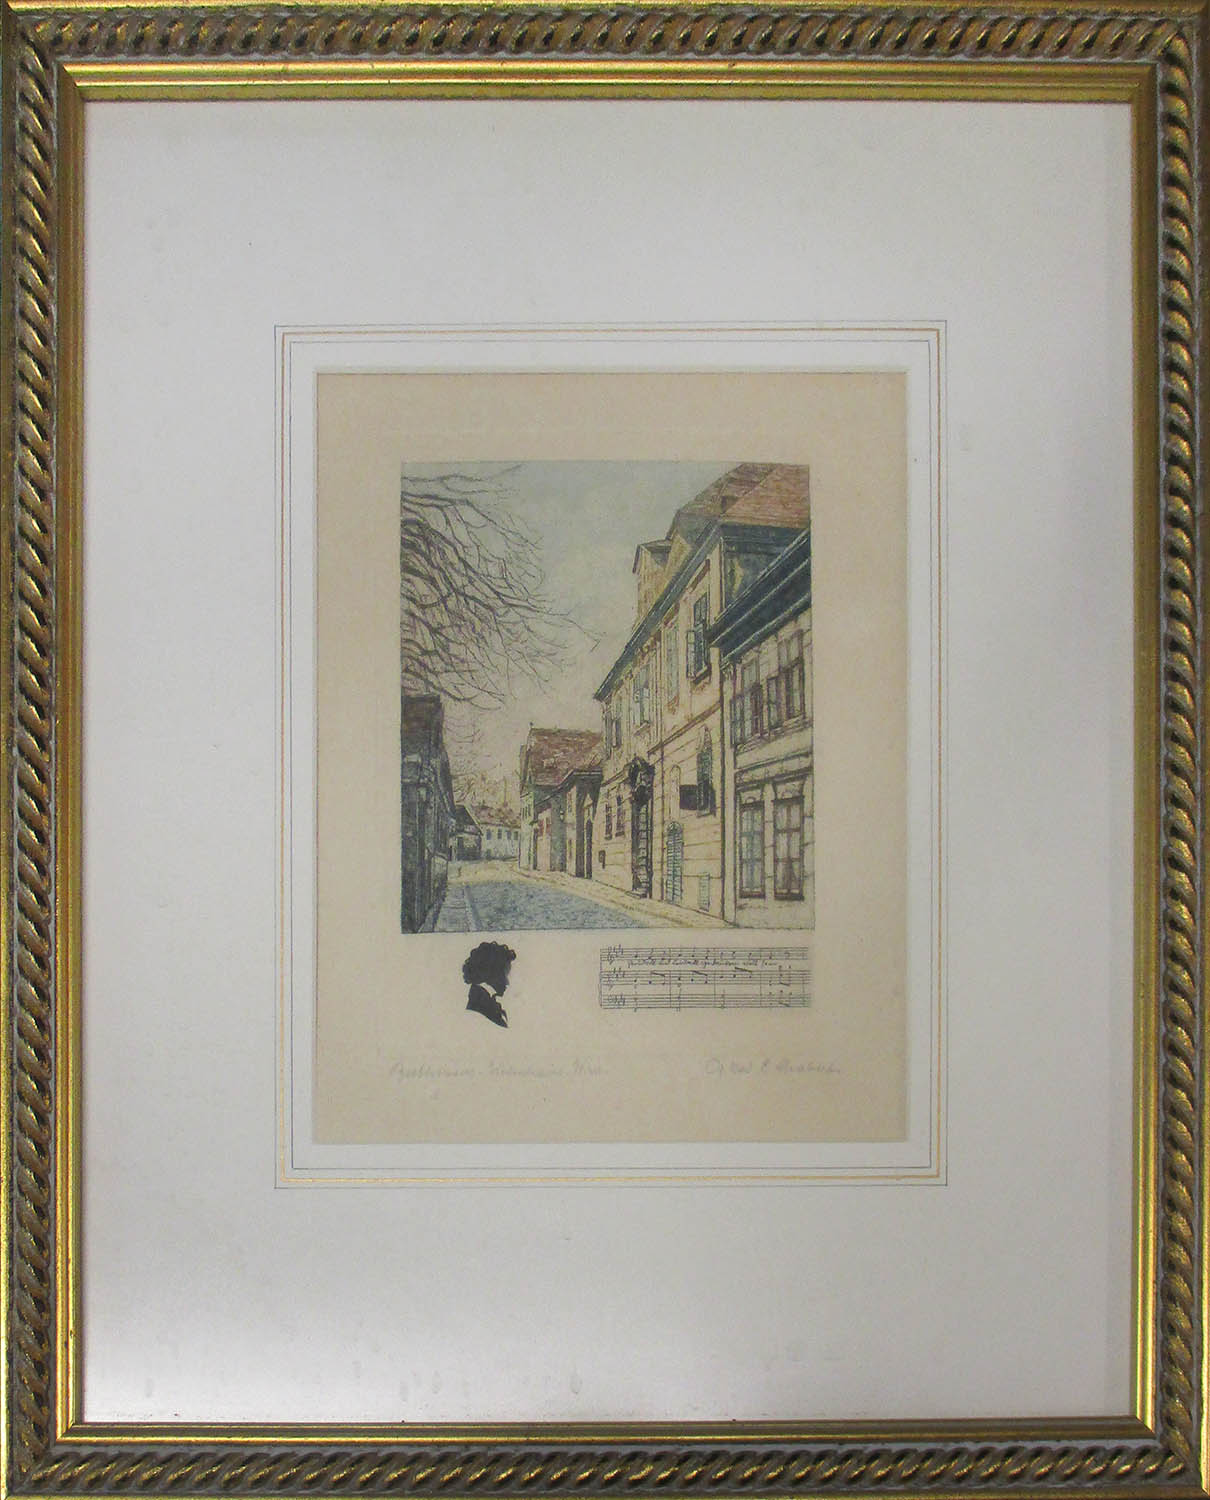 OG. KAV. E. CHABERT 'Beethoven's House and Schubert's Birth House in Vienna', a pair of colour